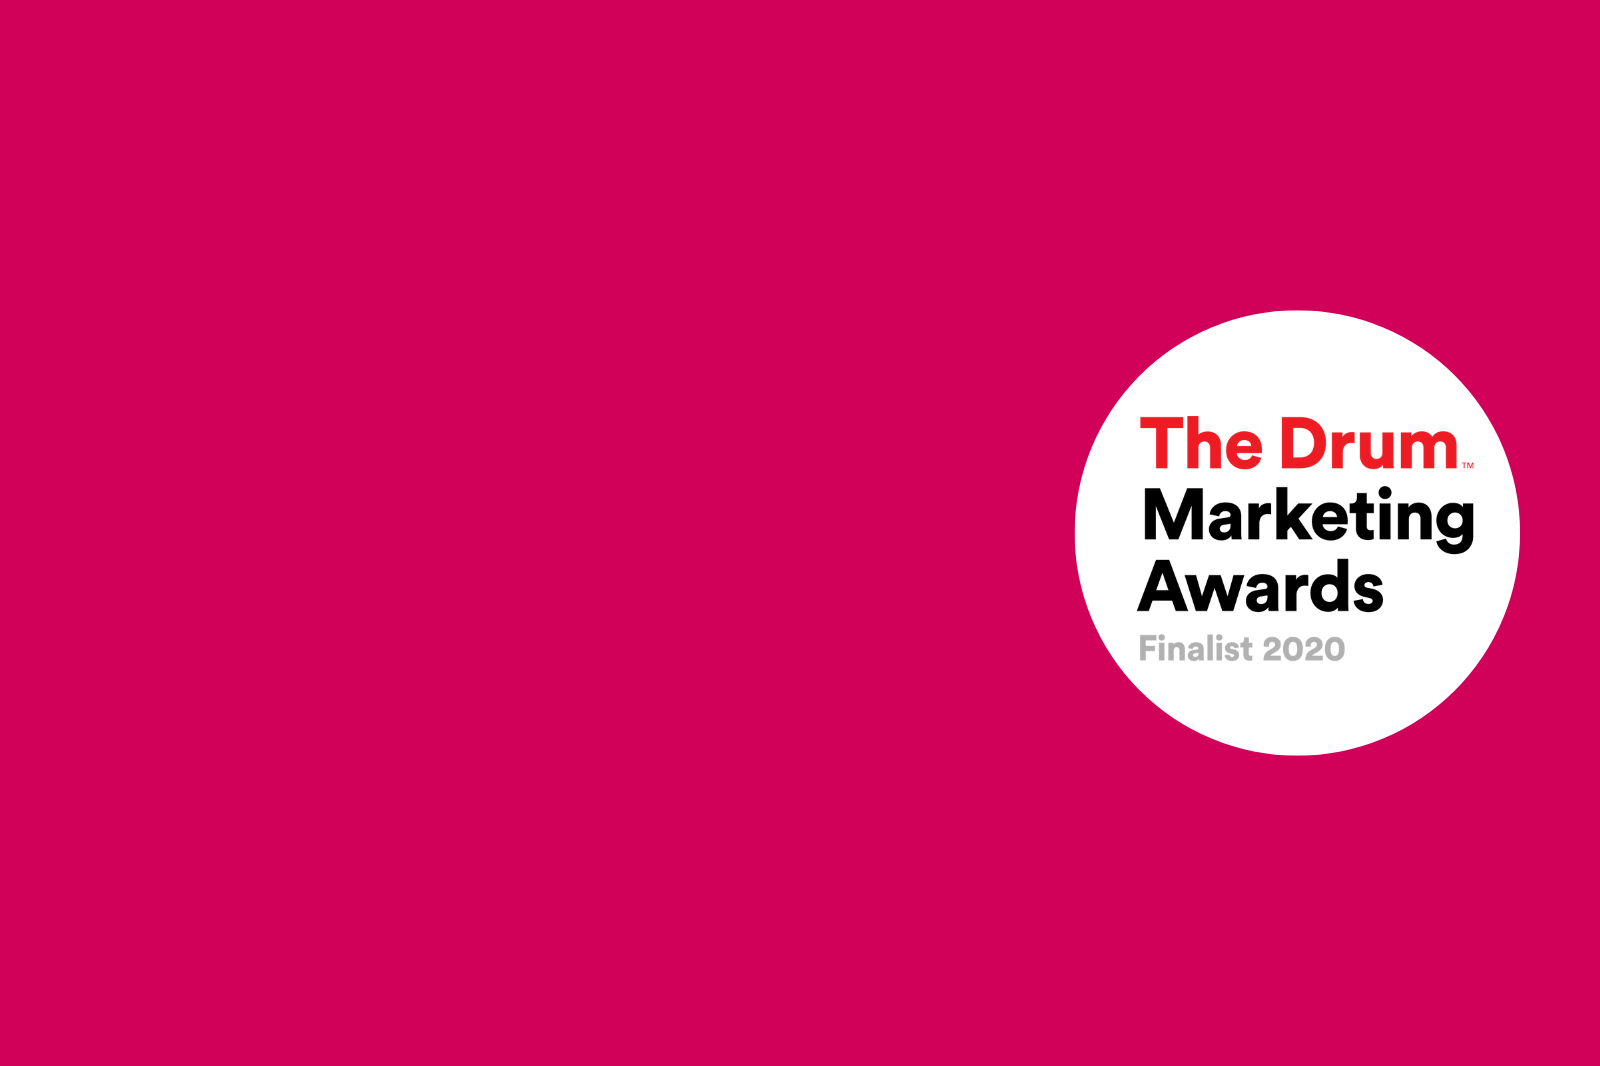 The Drum Marketing Awards 2020 Finalists logo on a pink background.